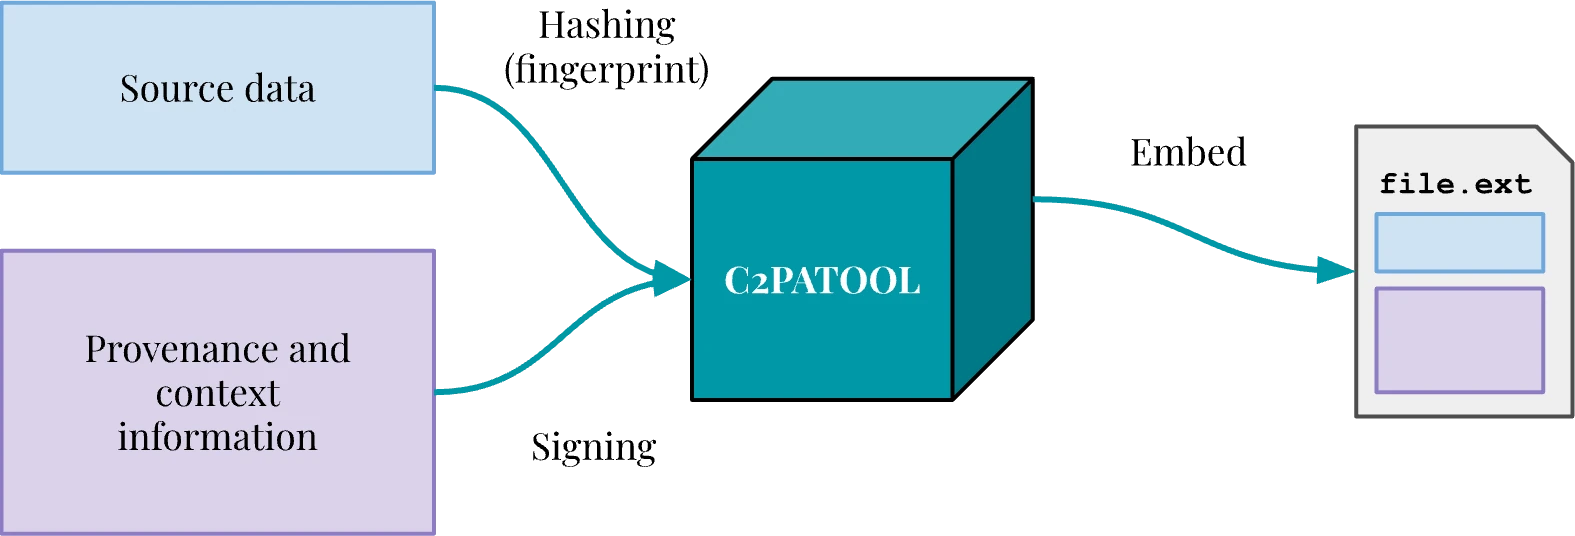 Diagram: c2patool allows for embedding signed provenance information into a file.